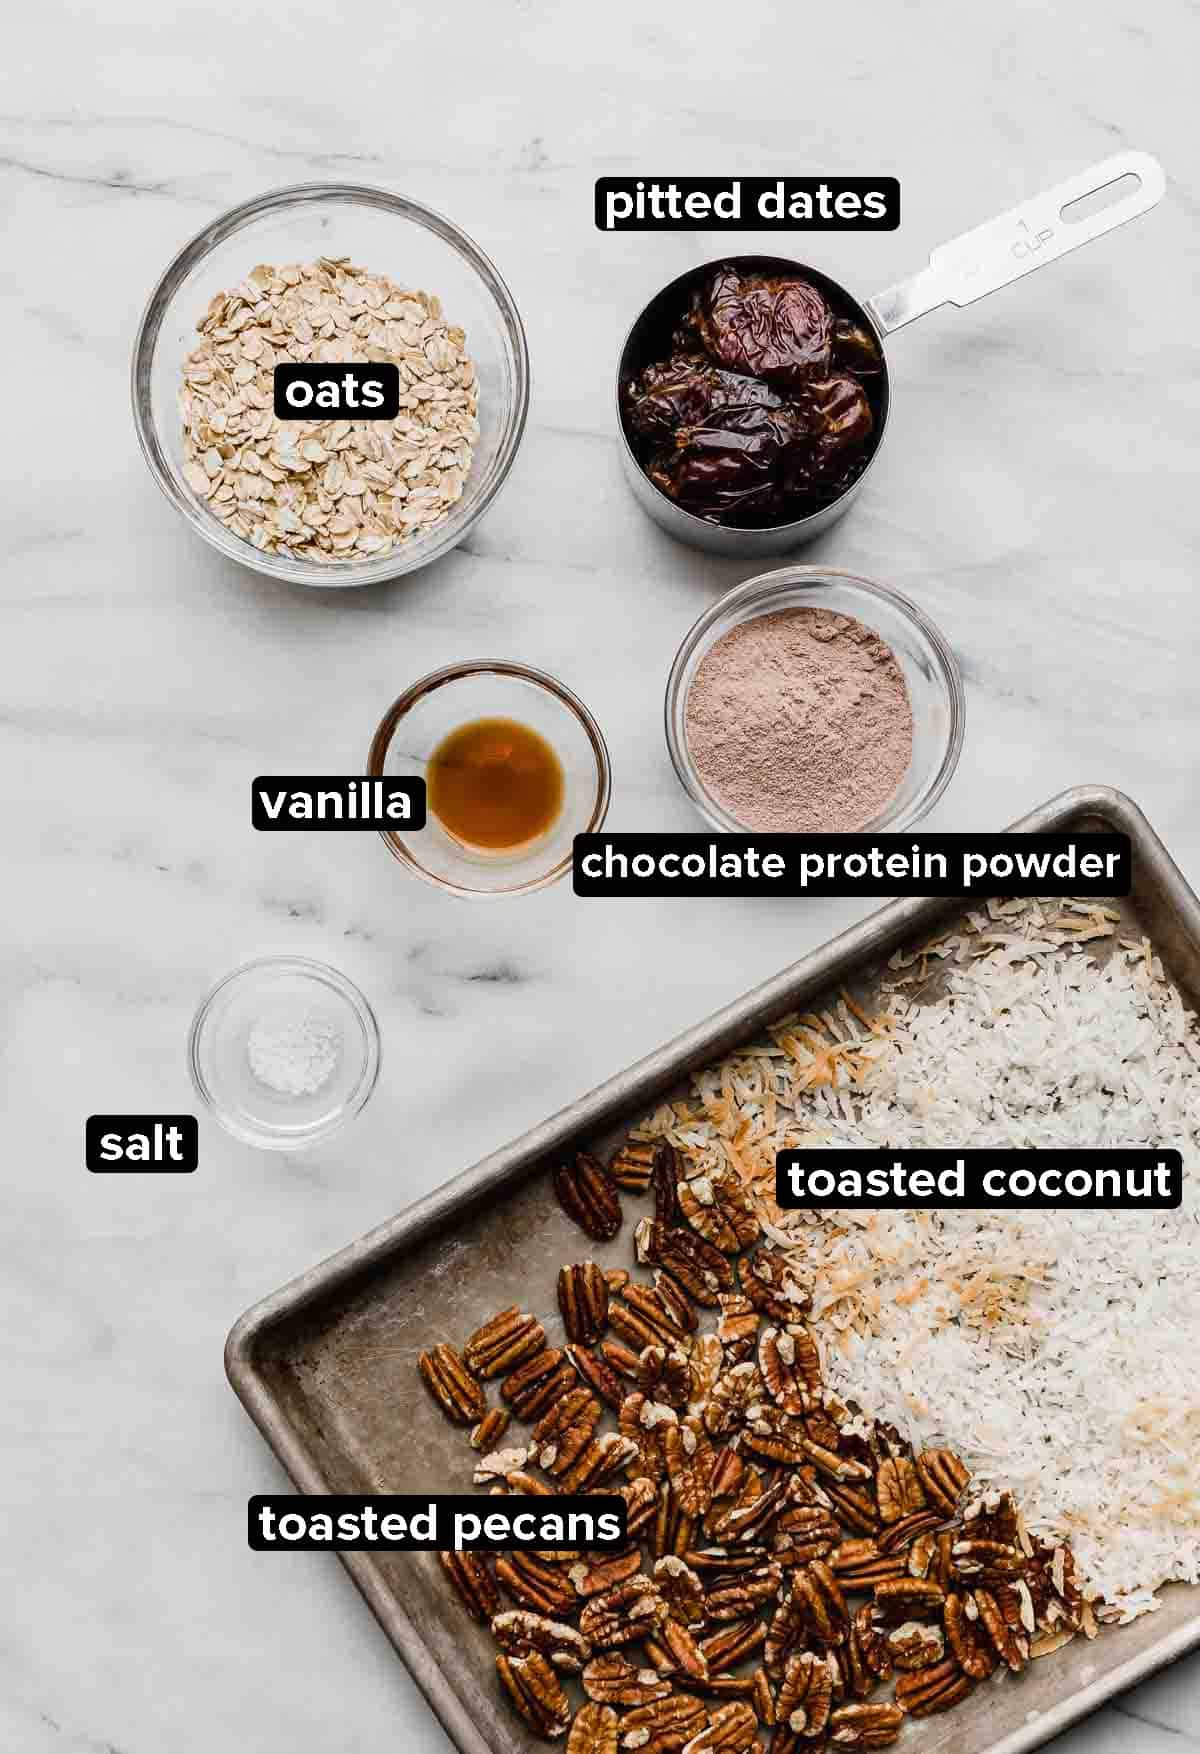 German Chocolate protein balls ingredients on a white marble background: pecans, coconut, dates, oats, vanilla, and protein powder.